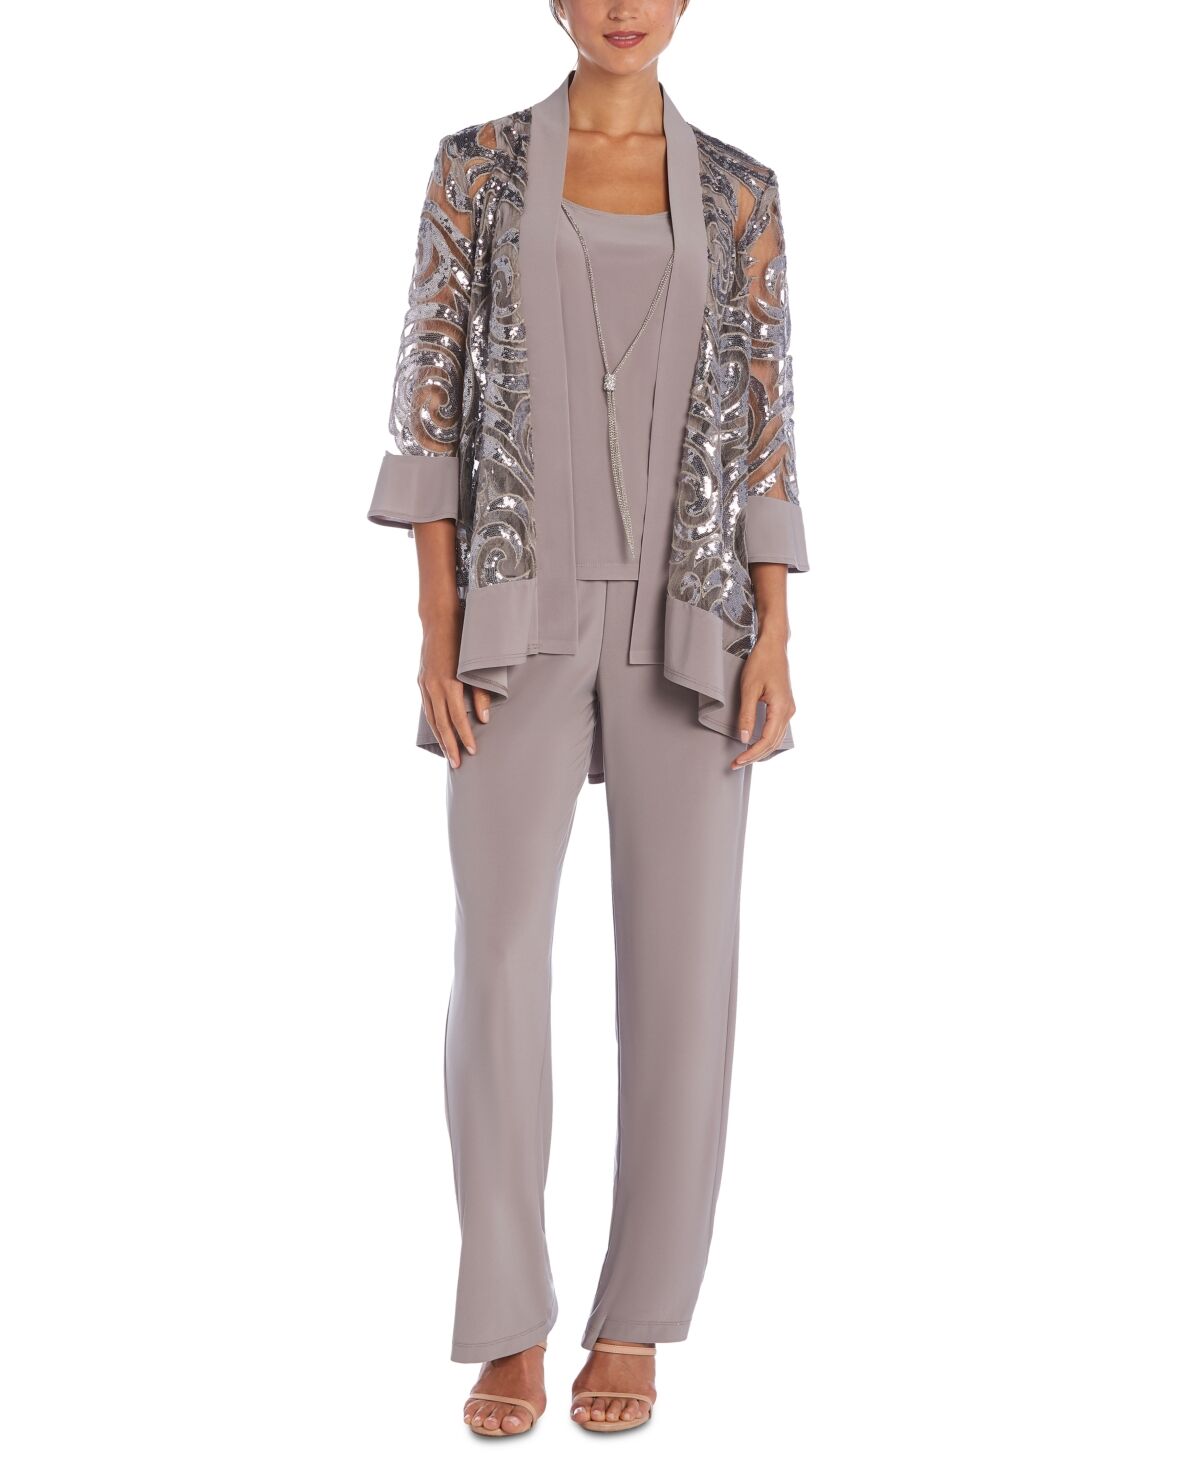 R & M Richards 3-Pc. Sequinned Jacket, Necklace Tank Top & Pants Set - Champagne